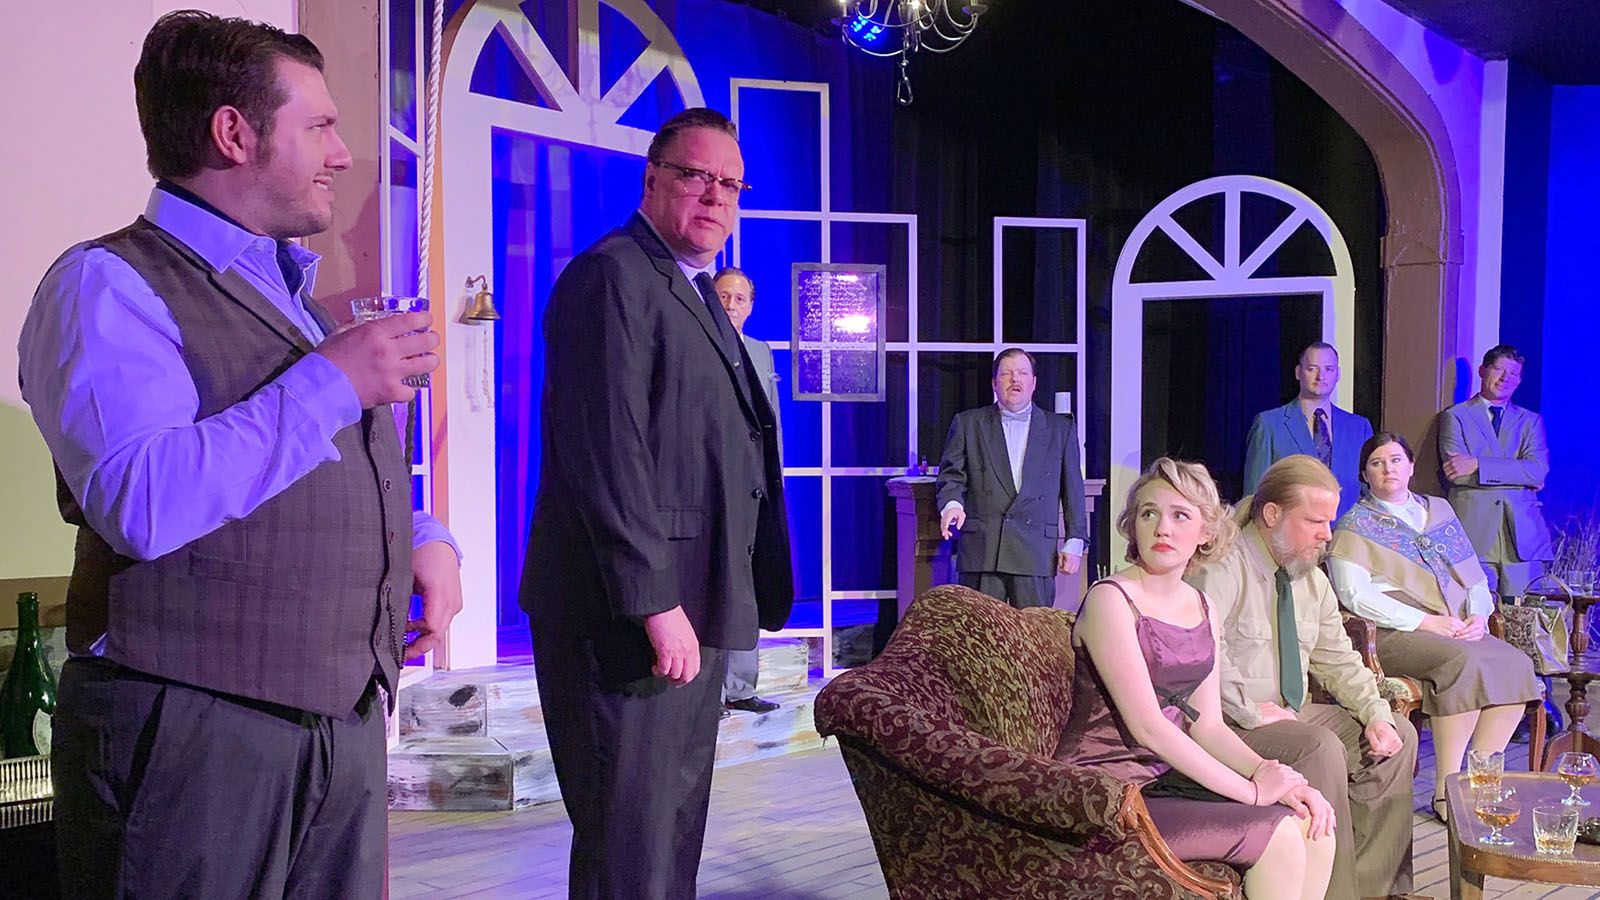 Arena Dinner Theatre's current show is "And Then There Were None."